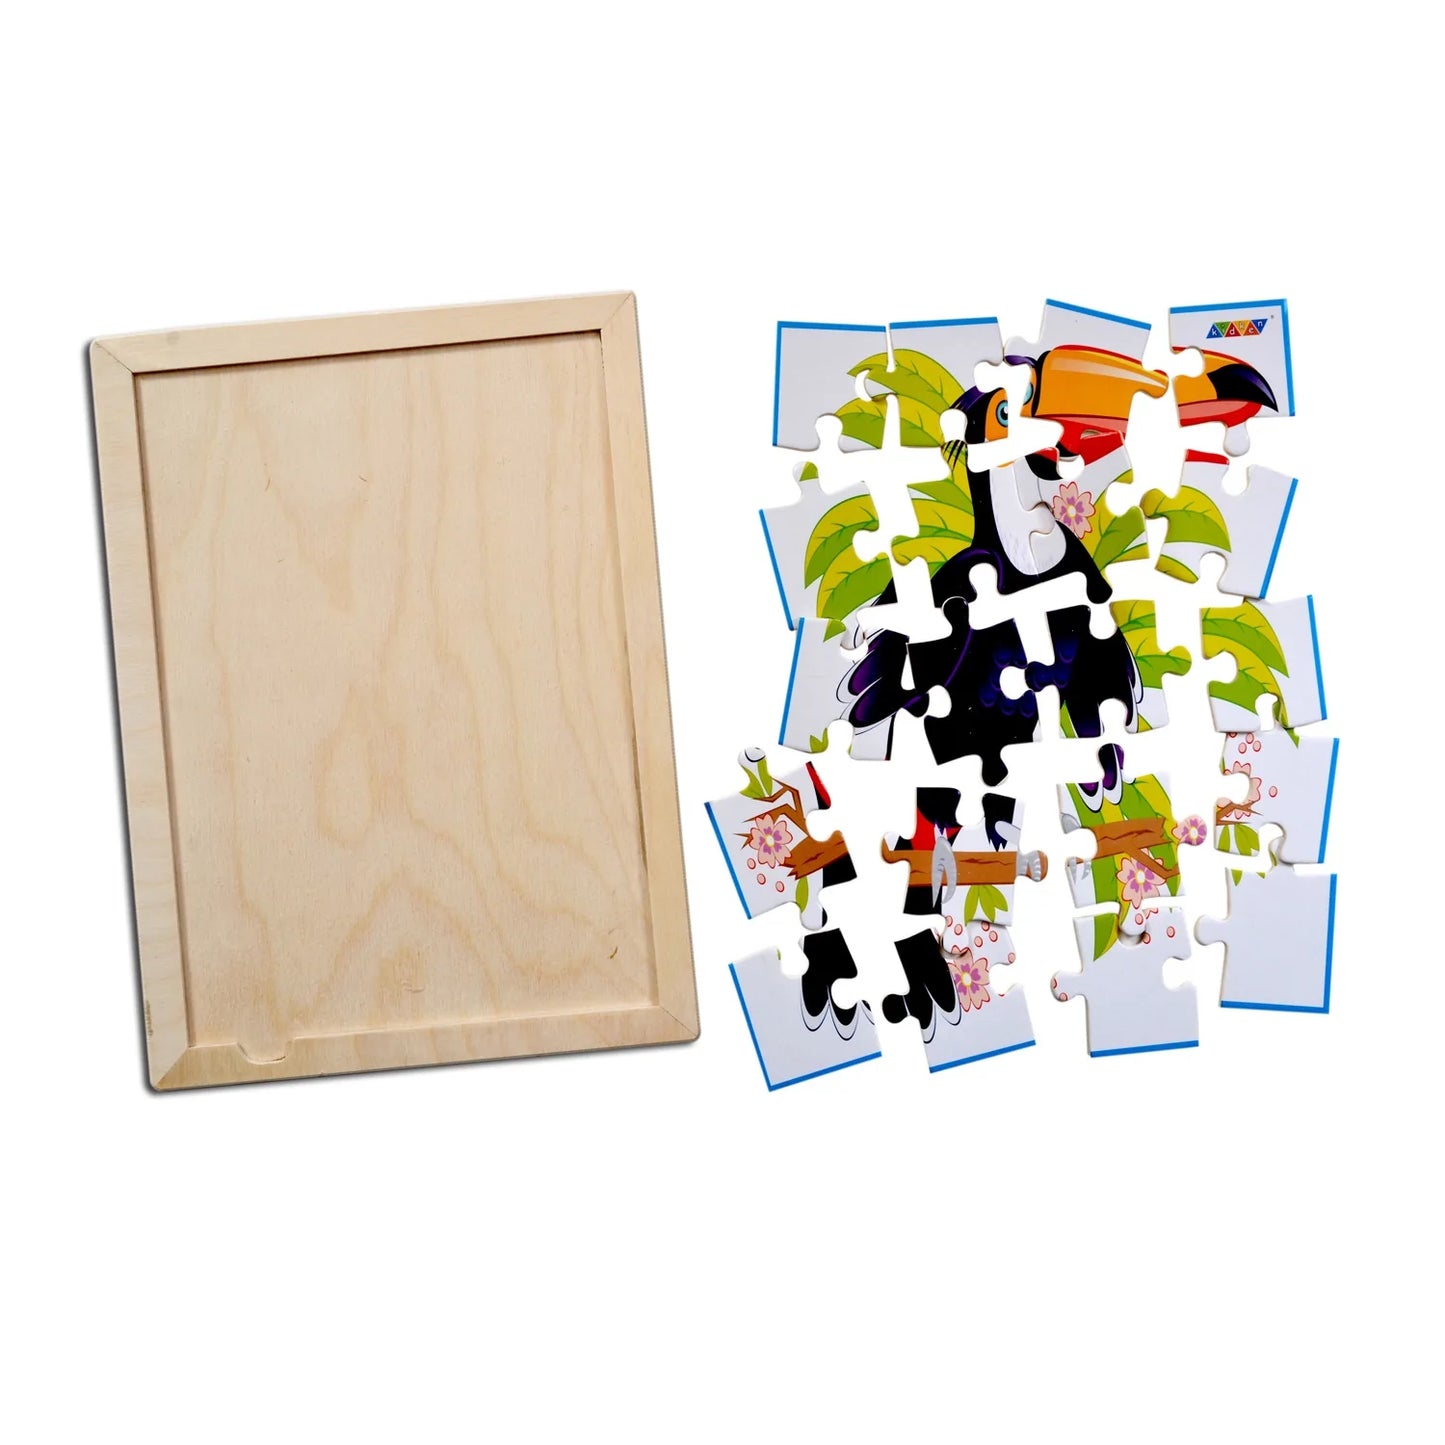 Toucan Bird Jigsaw Puzzle With Colouring Sheet